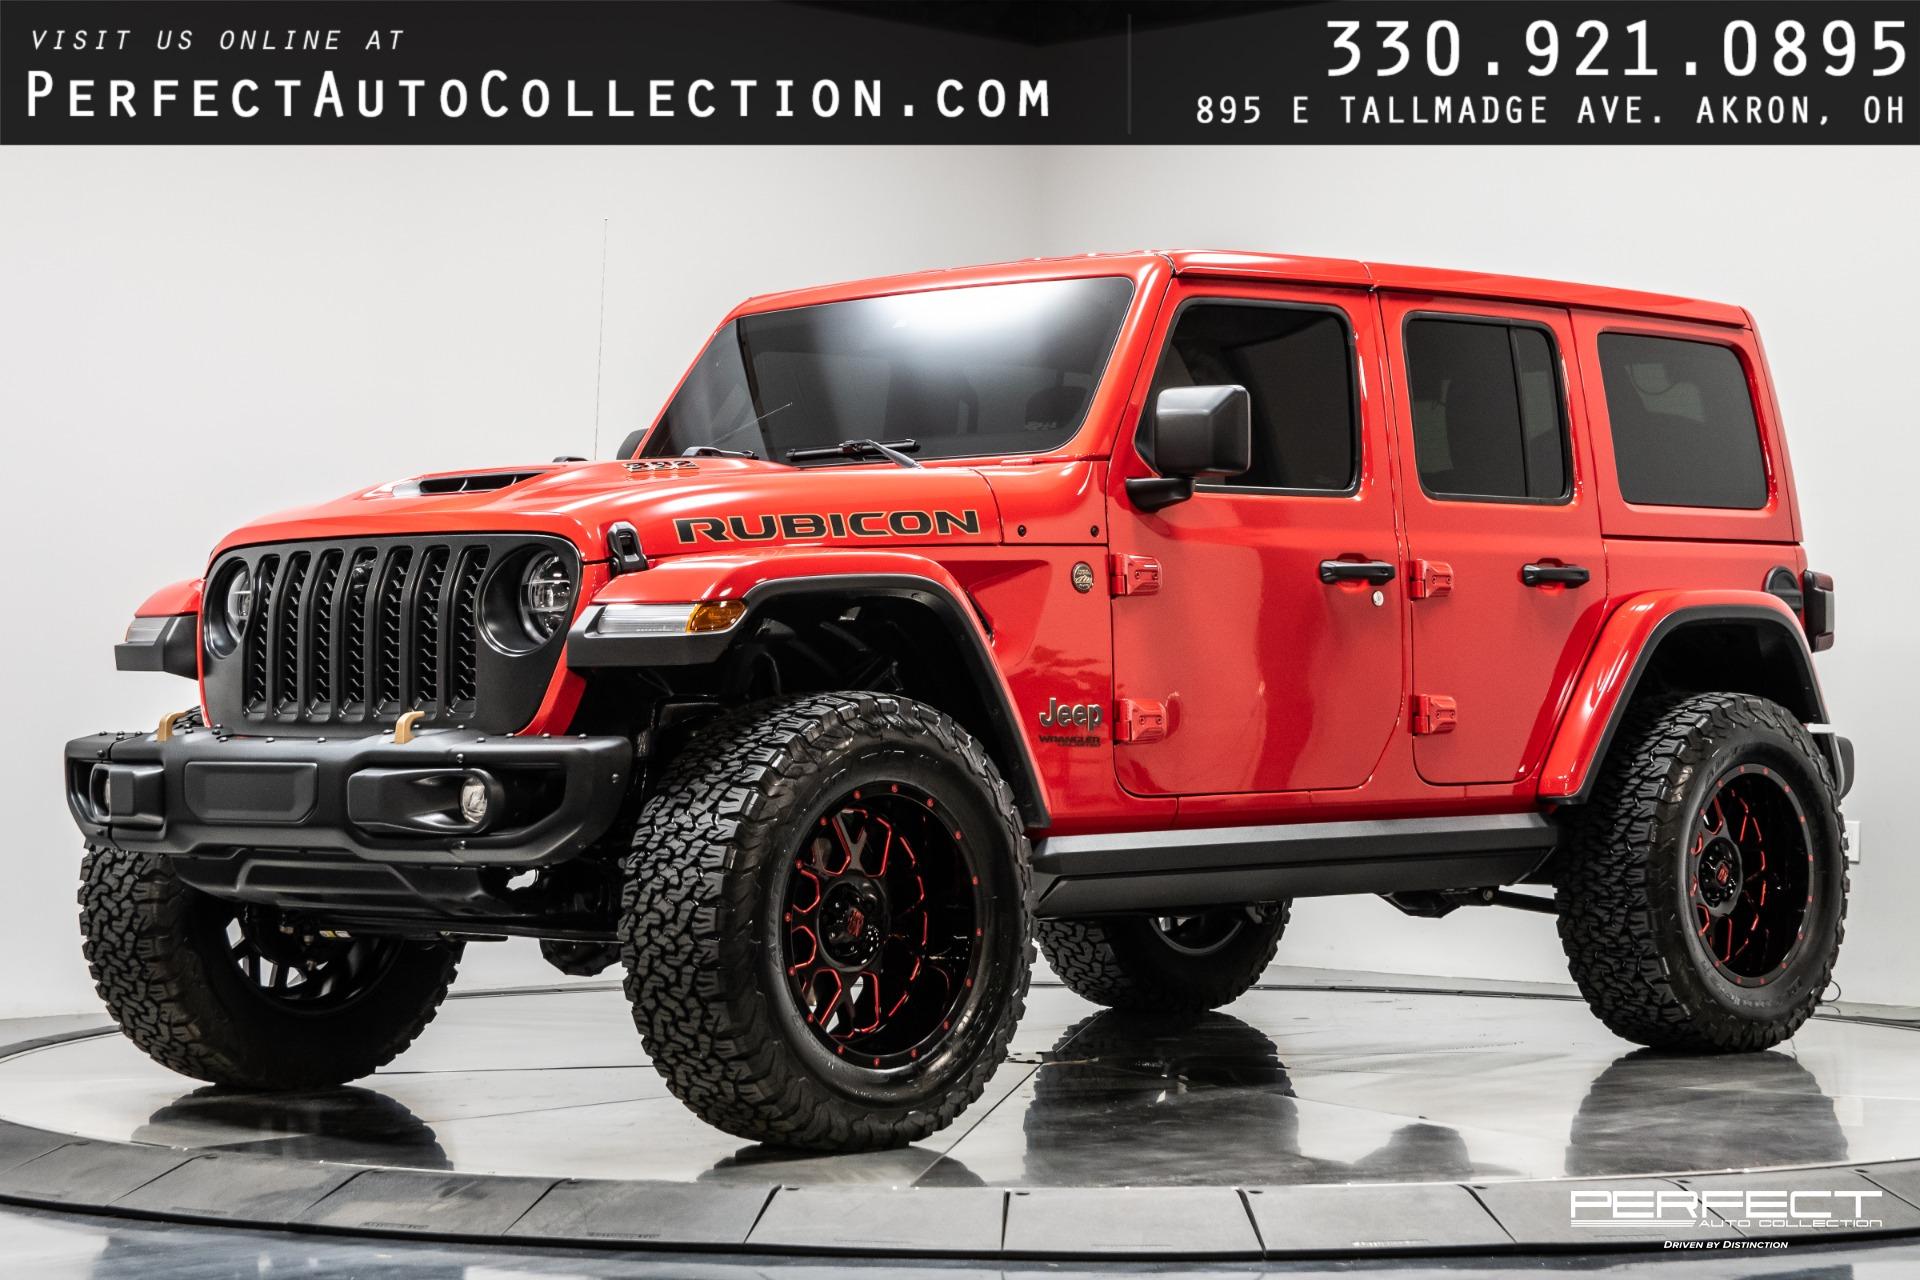 Used 2021 Jeep Wrangler Unlimited Rubicon 392 For Sale (Sold) Perfect